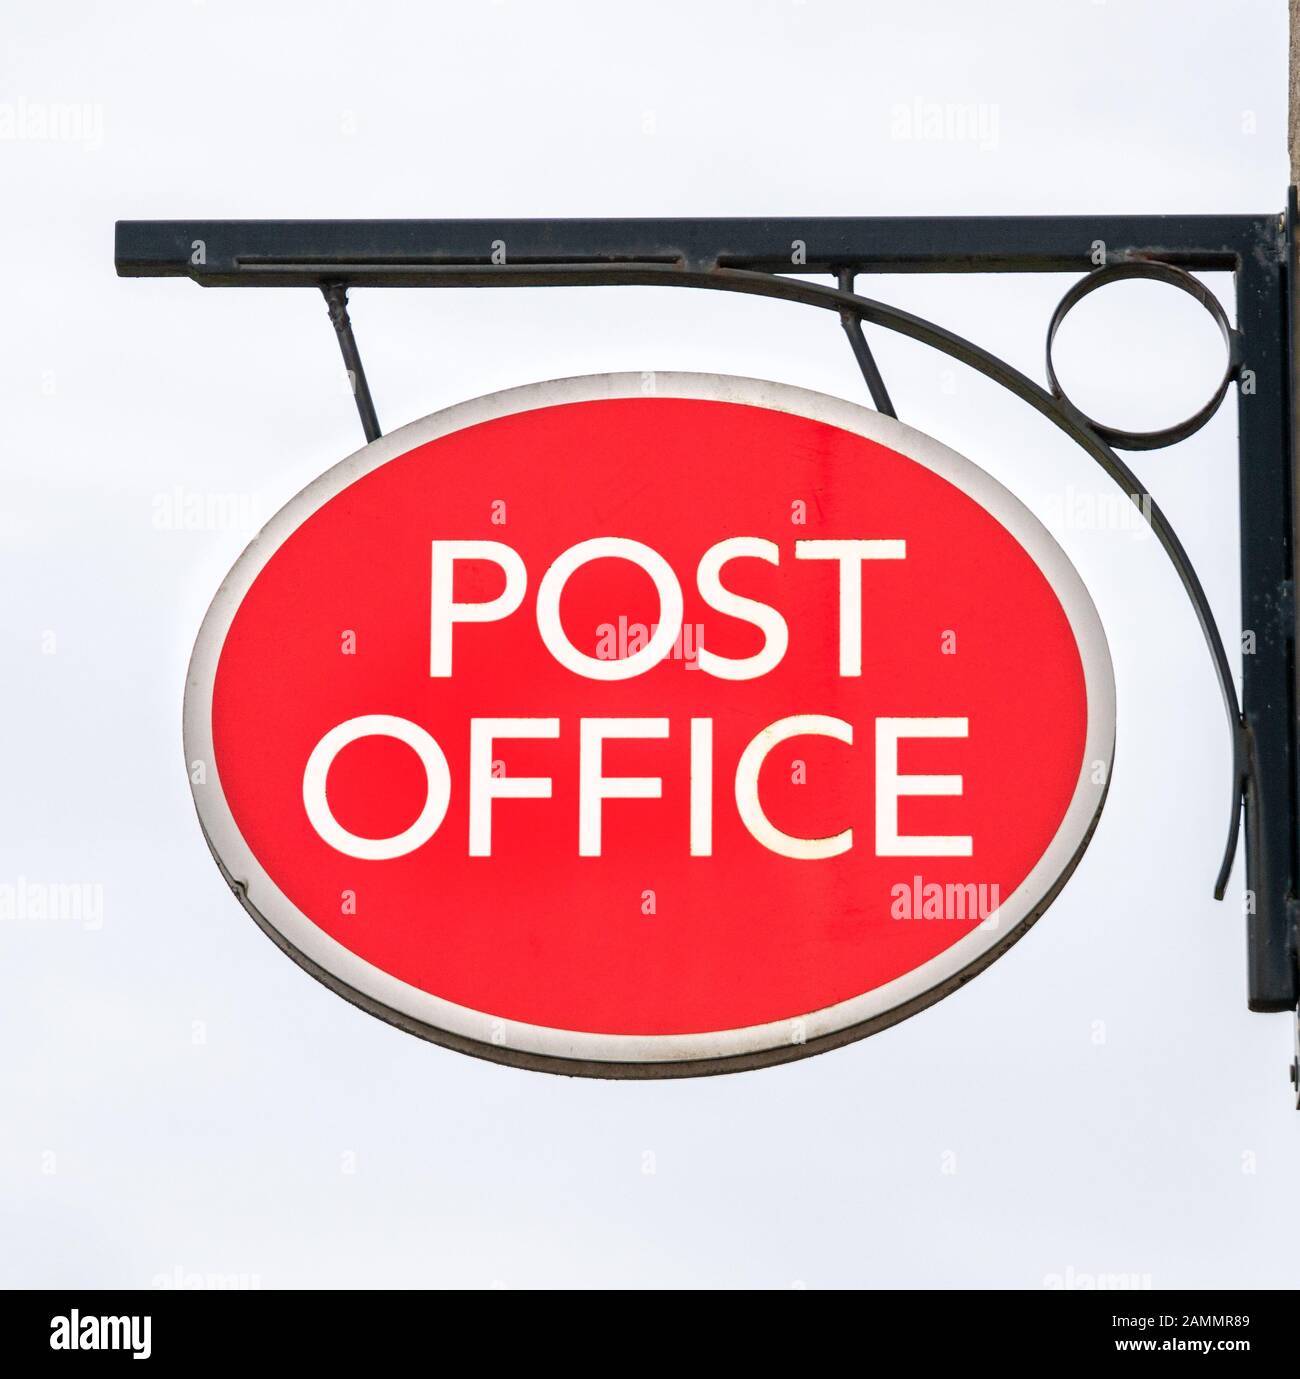 Post Office sign in rural location, England, United kingdom Stock Photo